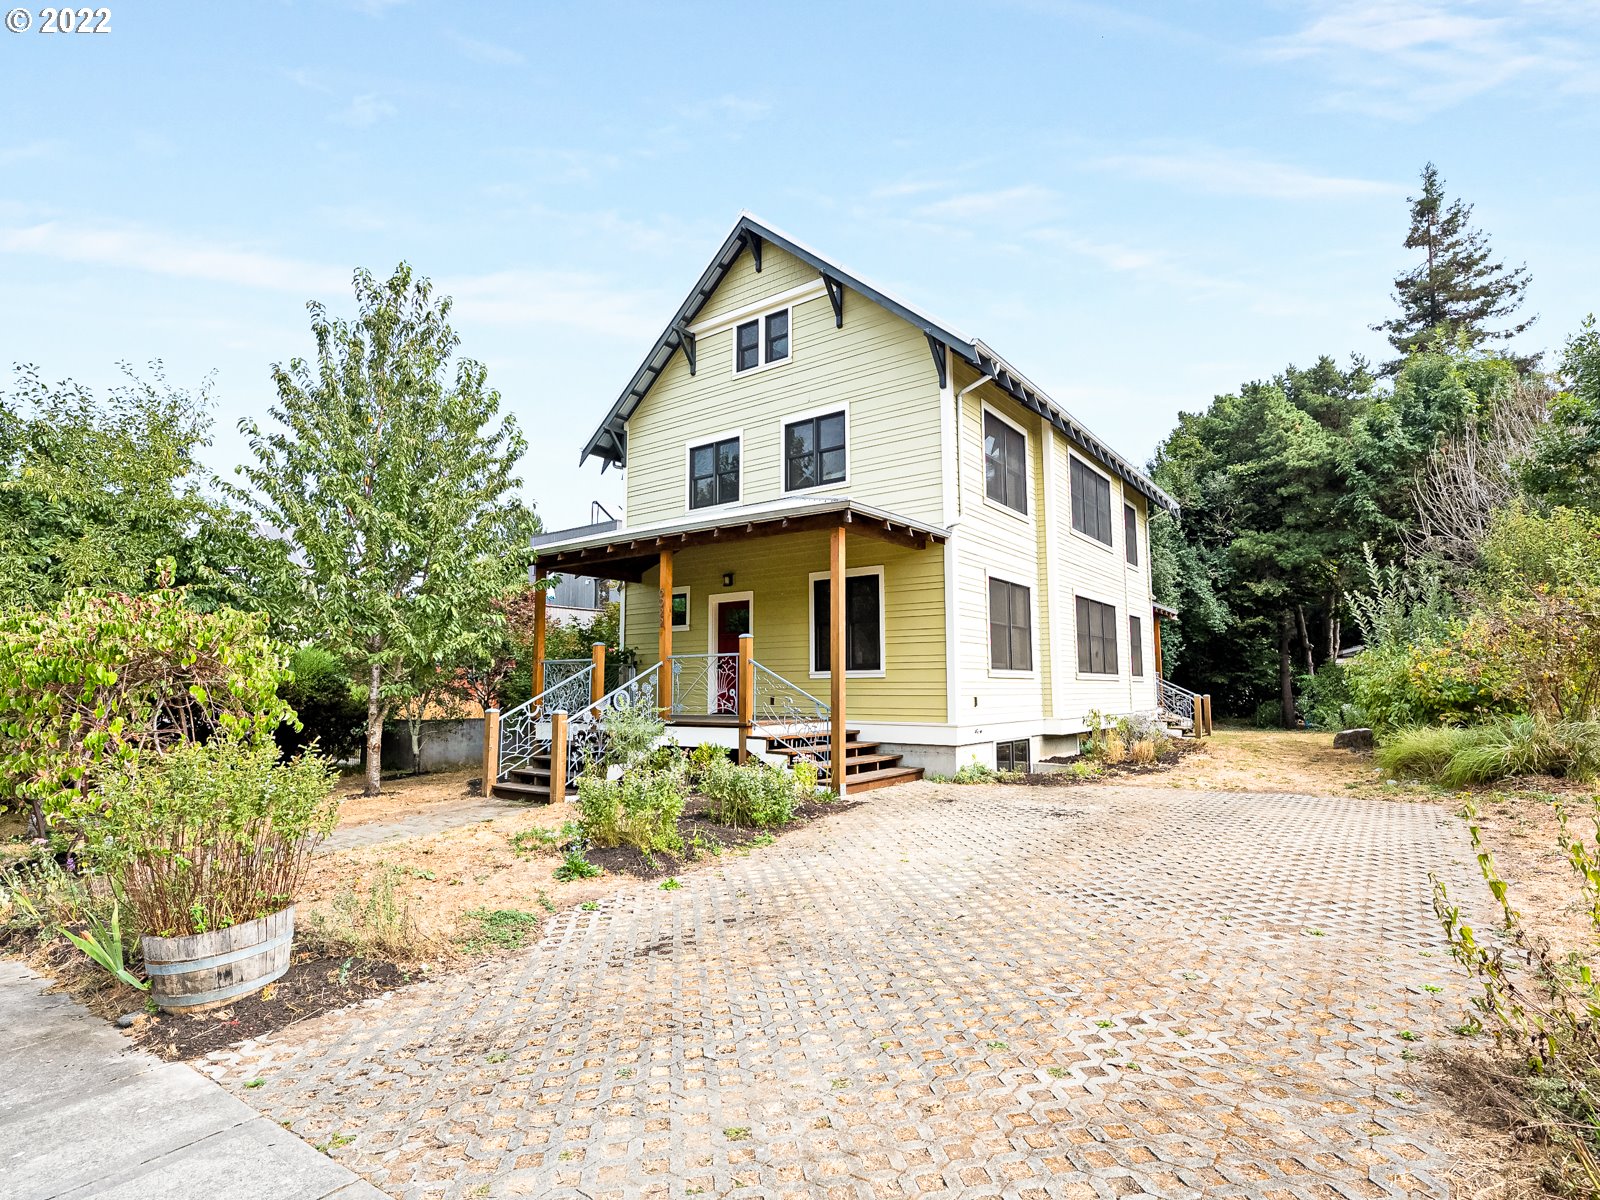 Portland Monthly: Property Watch